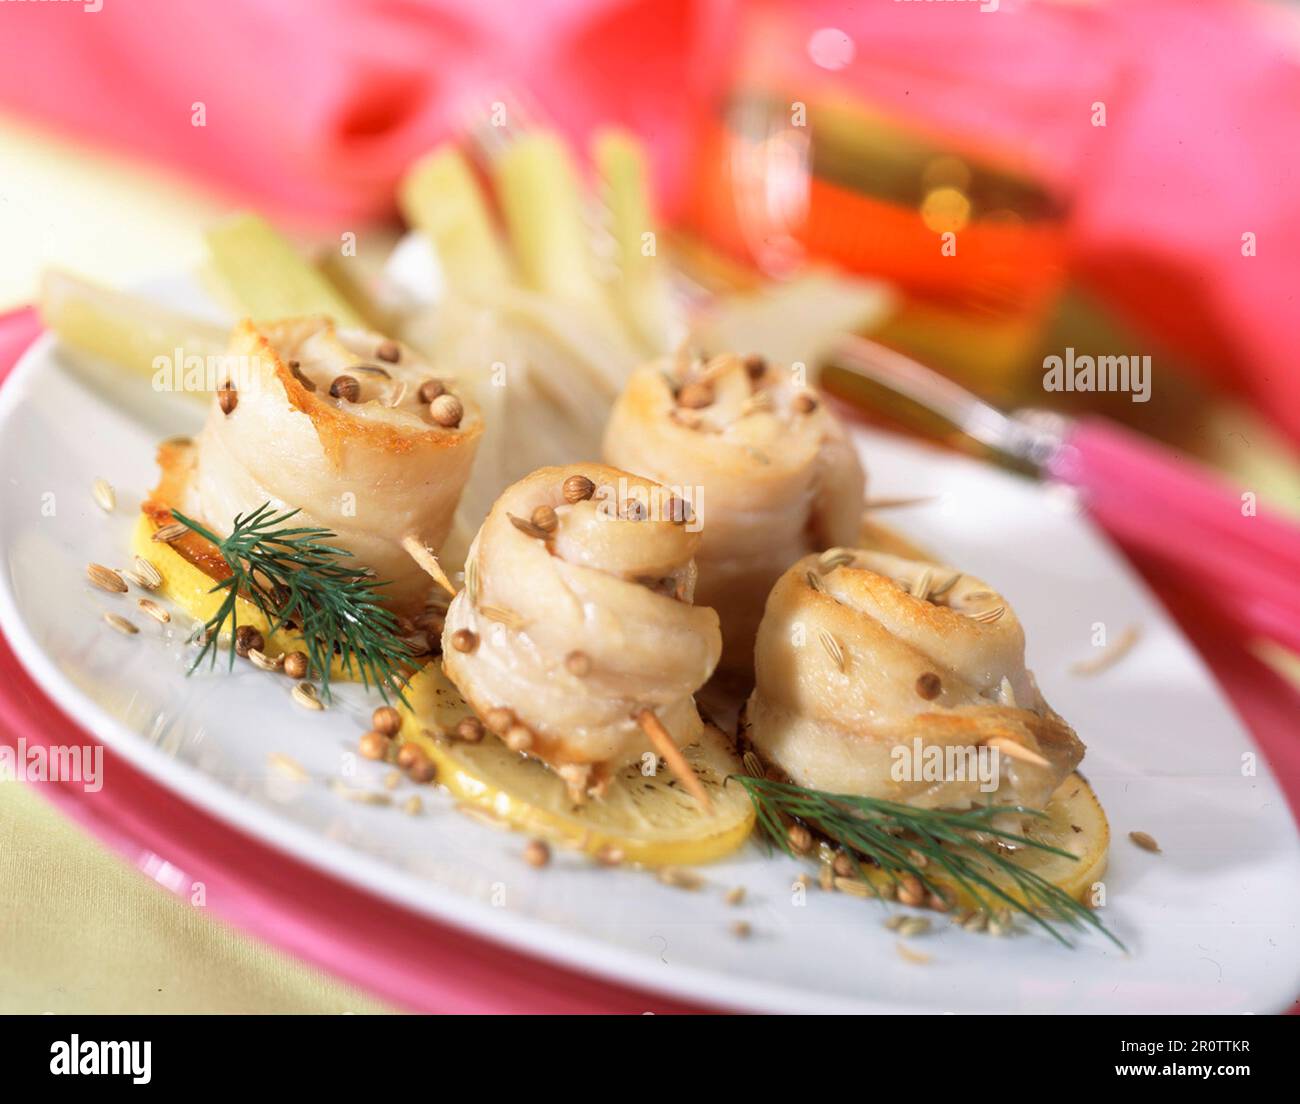 fillet of sole baked with fennel Stock Photo